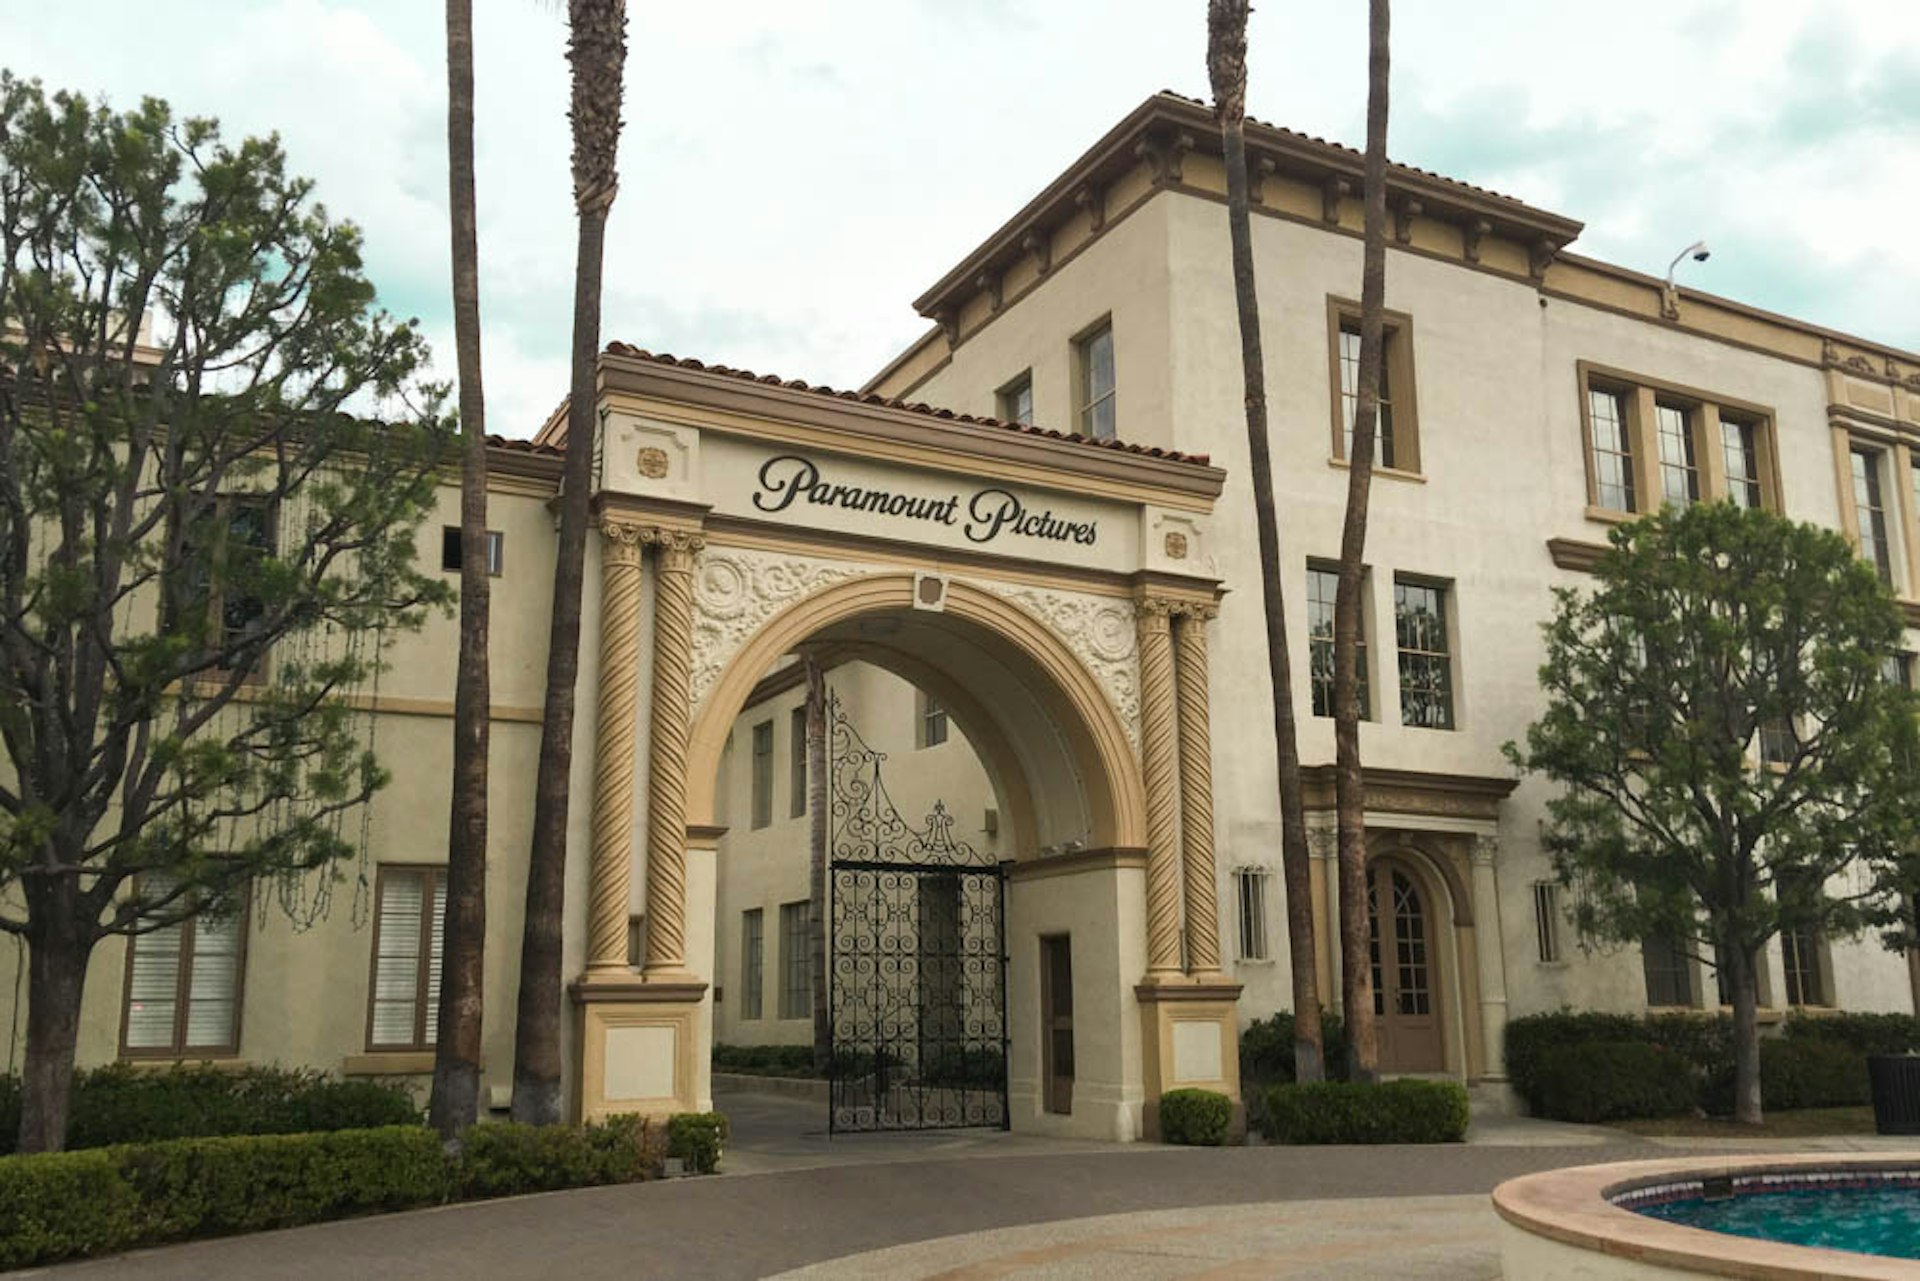 The famous arch of Paramount Pictures is part of a visit to their studios. © Tim Richards / Lonely Planet